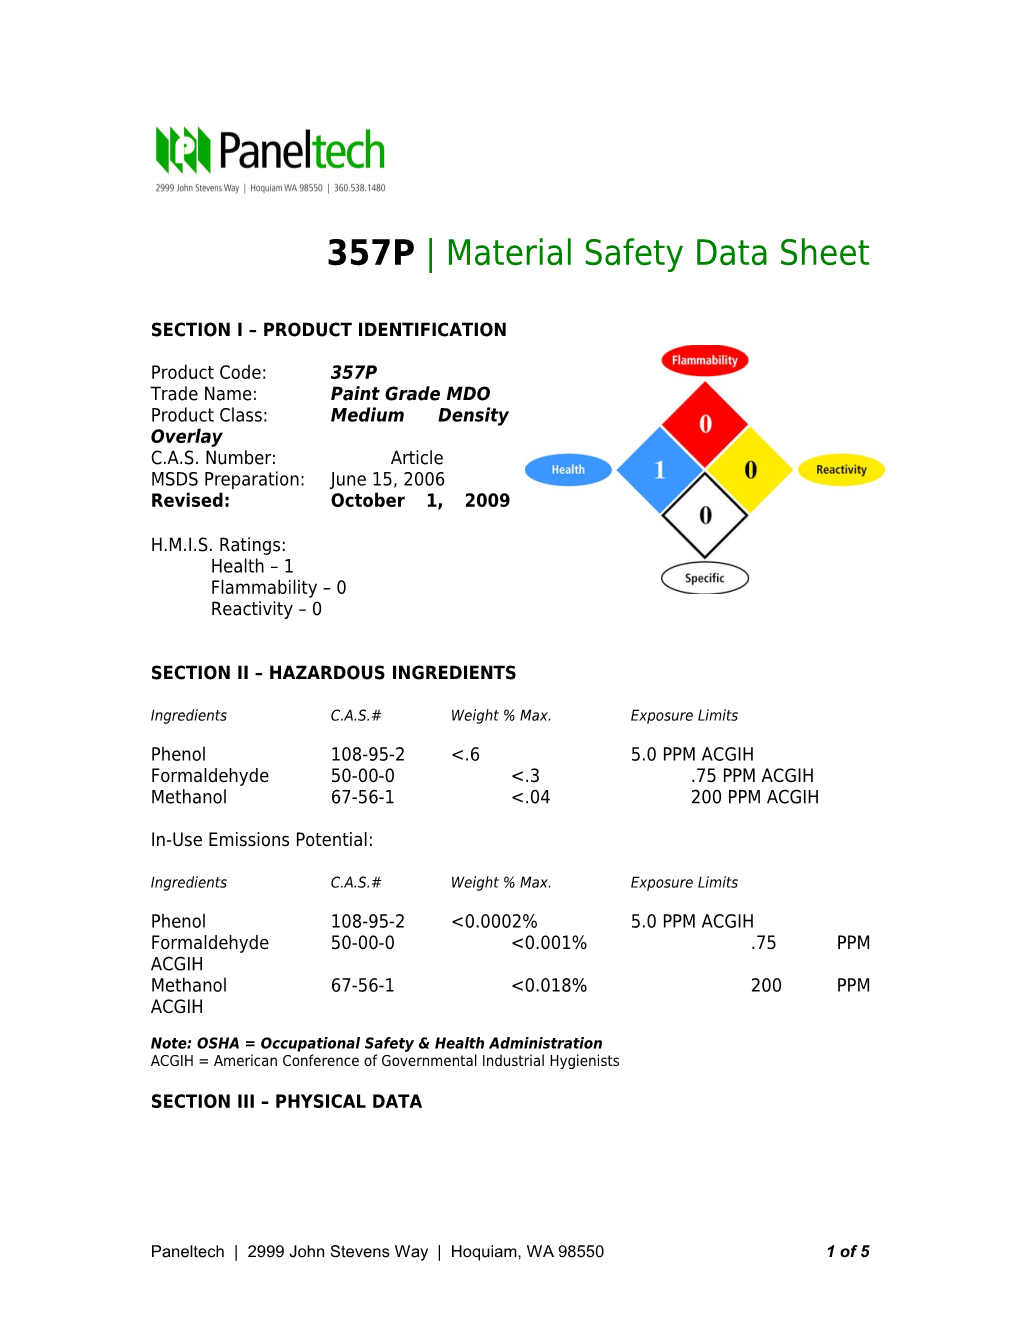 357P Material Safety Data Sheet